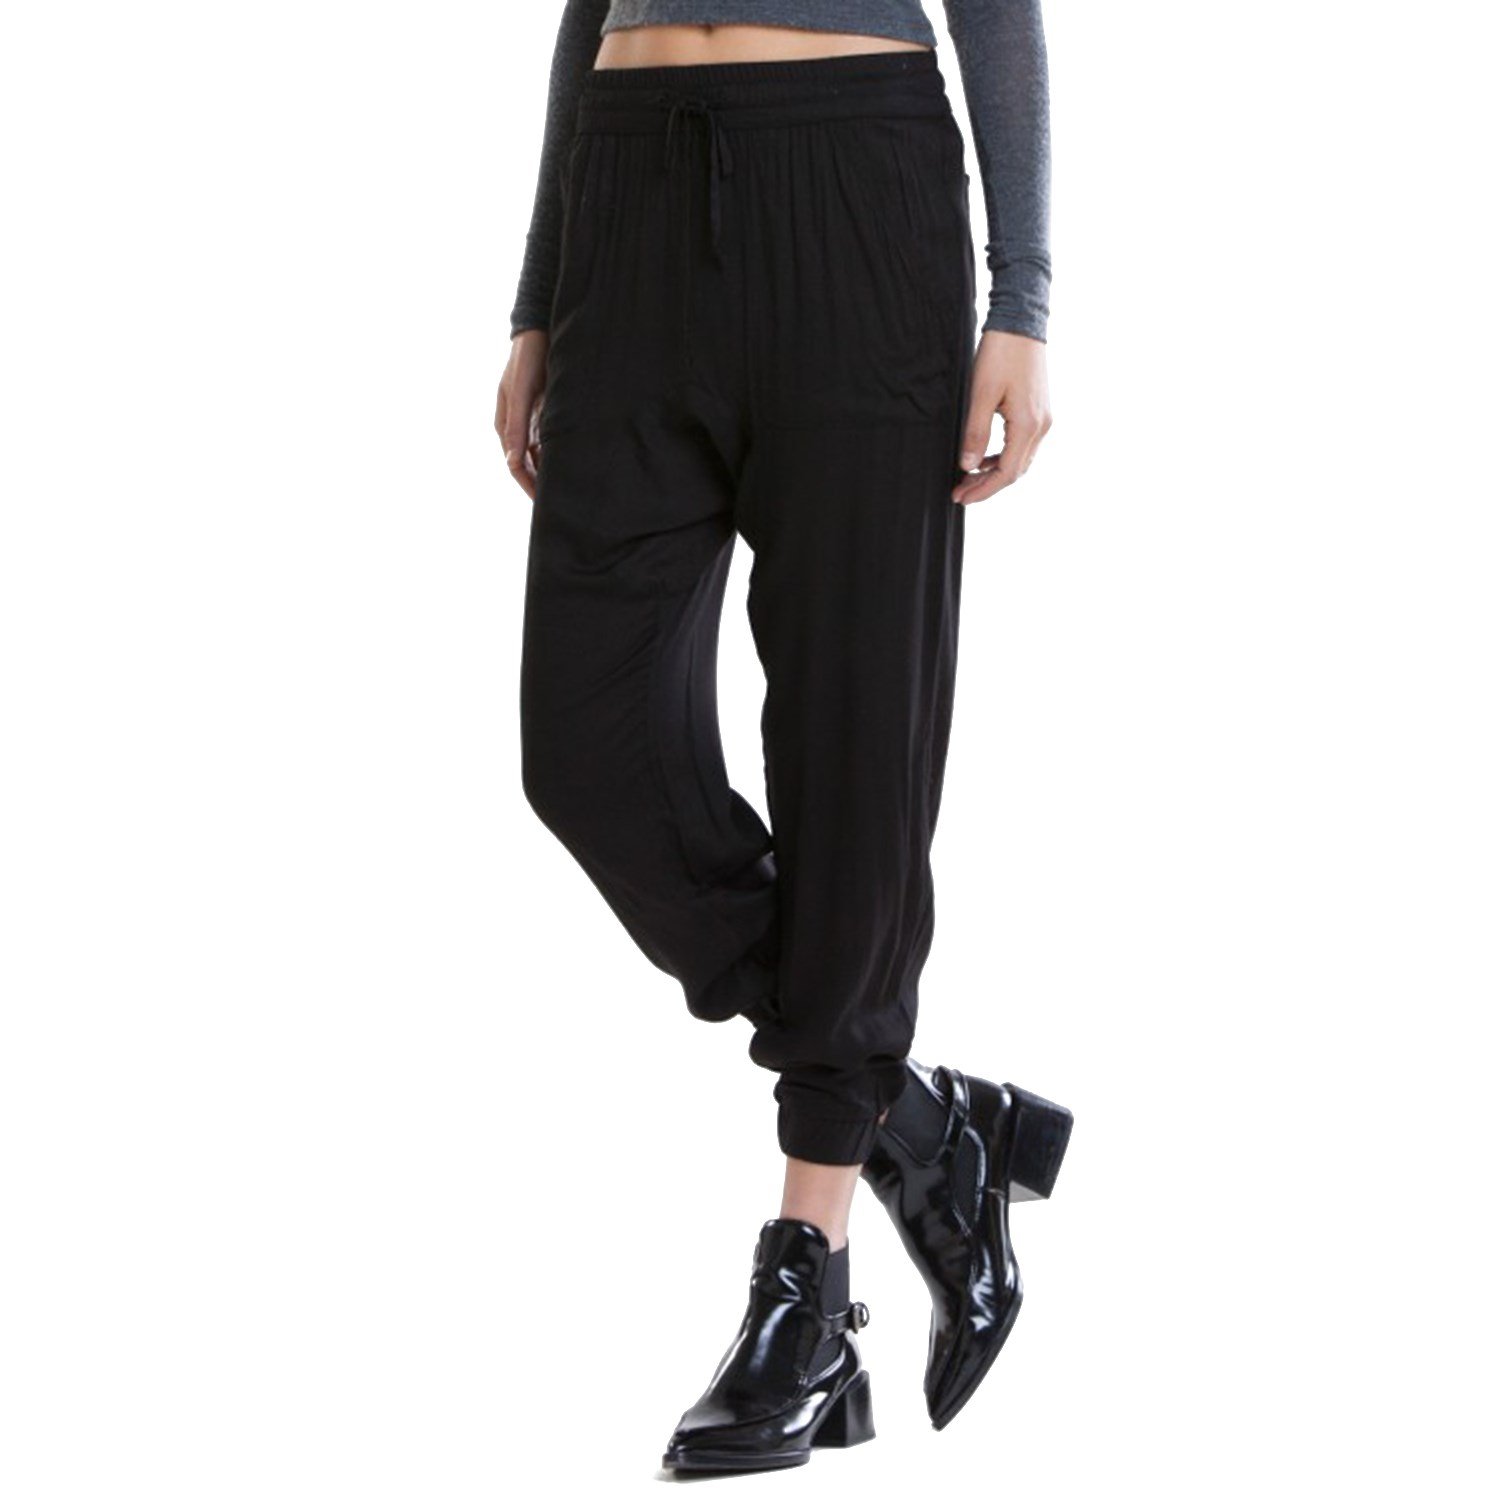 Obey Clothing Keegan Pants - Women's | evo outlet